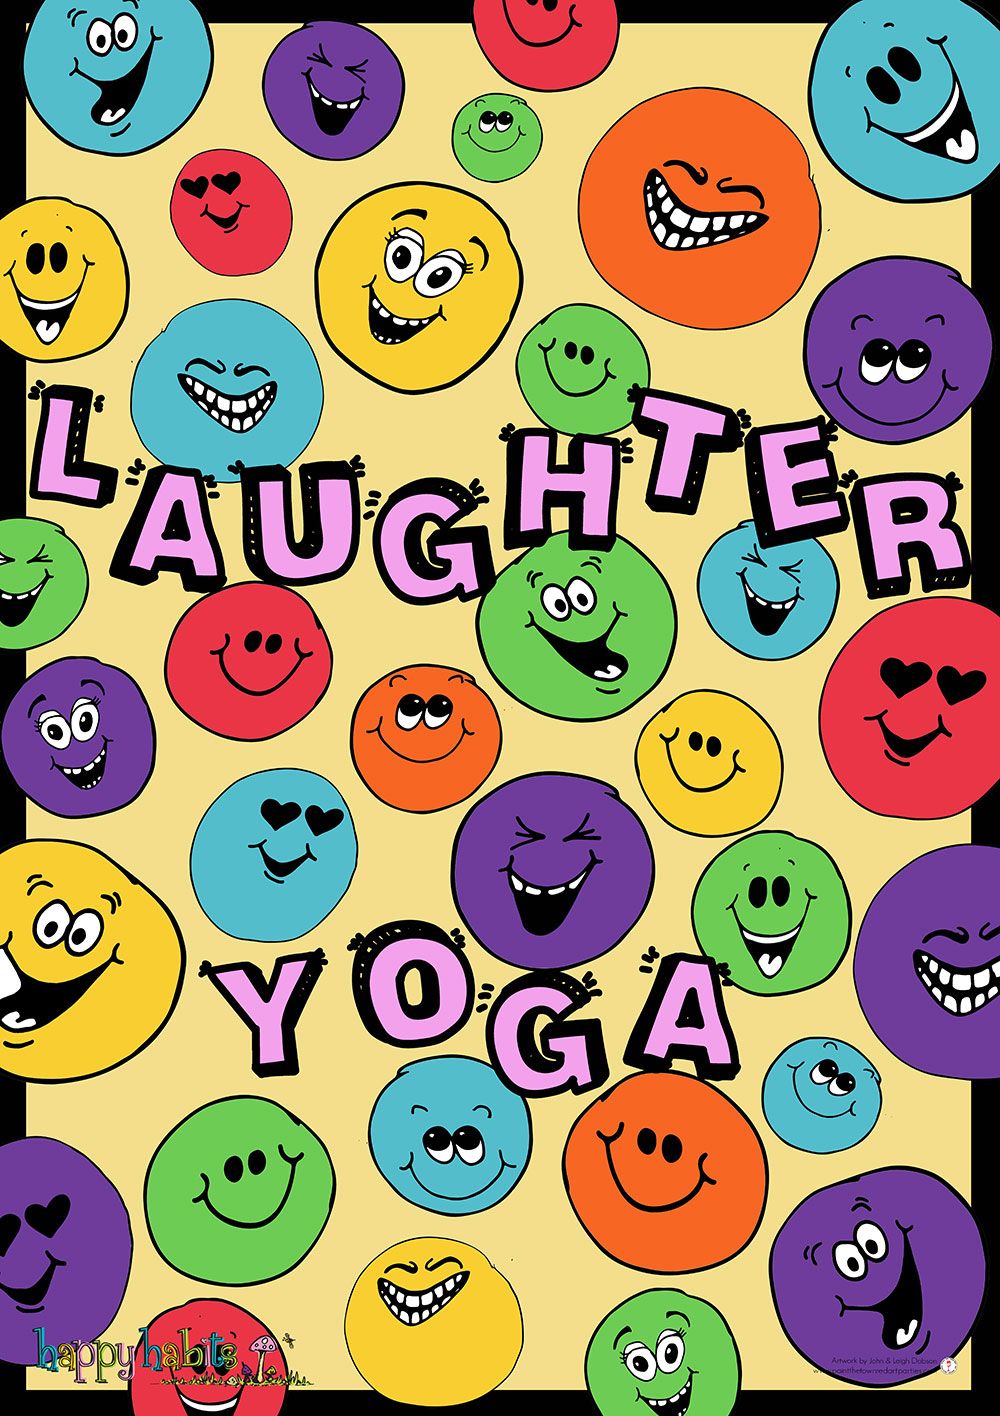 Laughter Yoga 